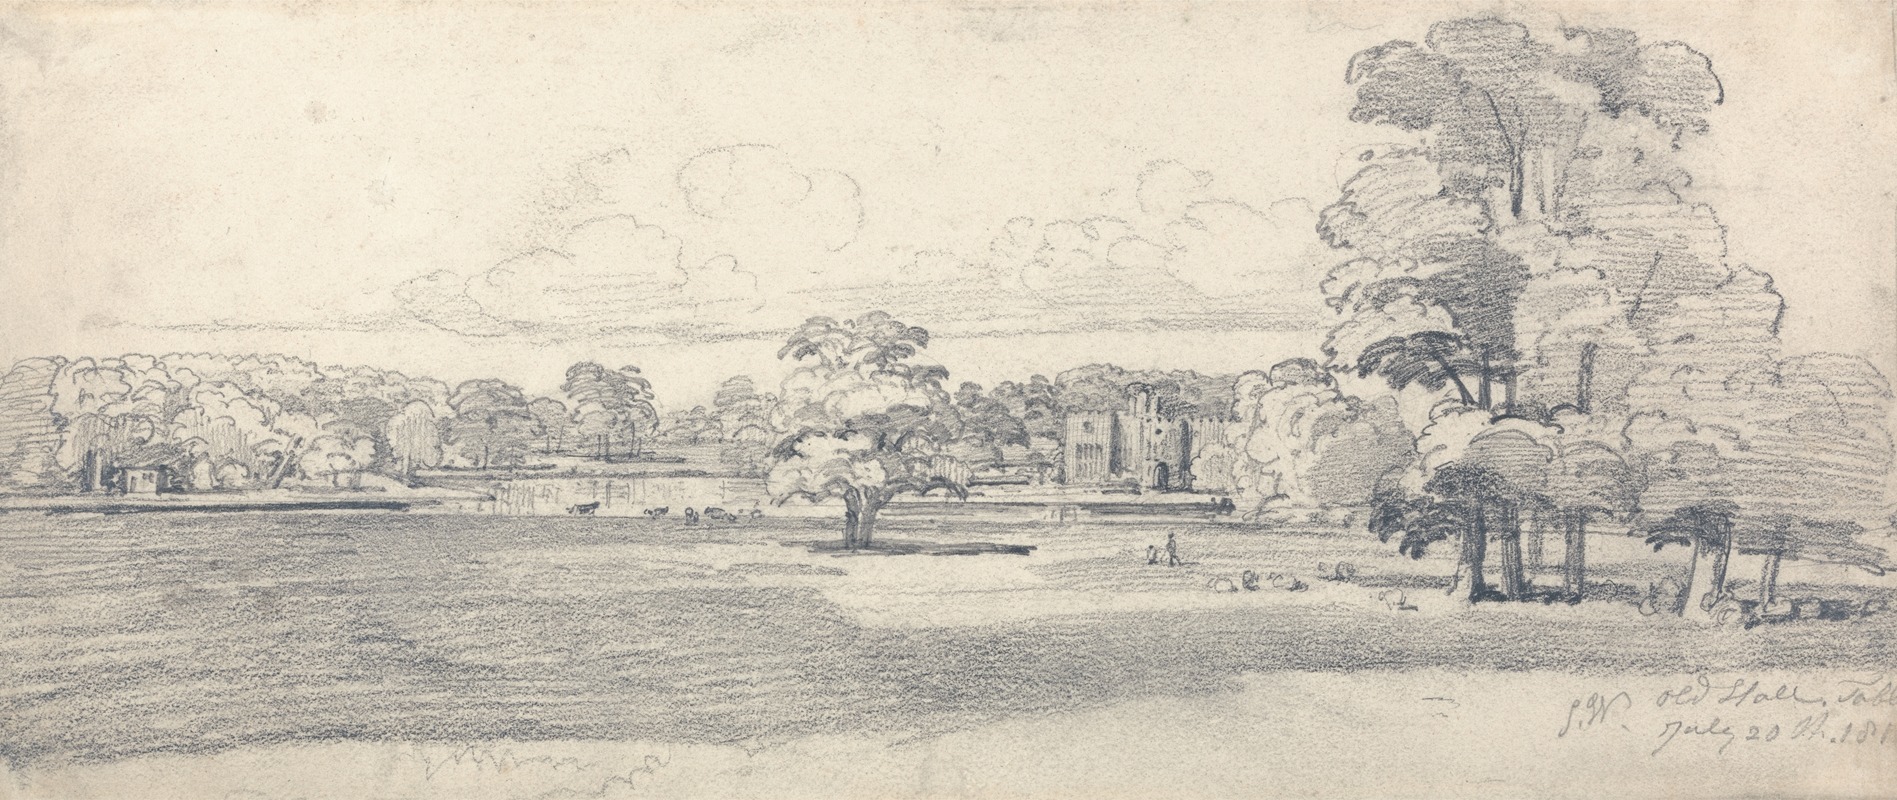 James Ward - The Old Hall, Tabley, Surrounded by Parkland, July 20, 1814